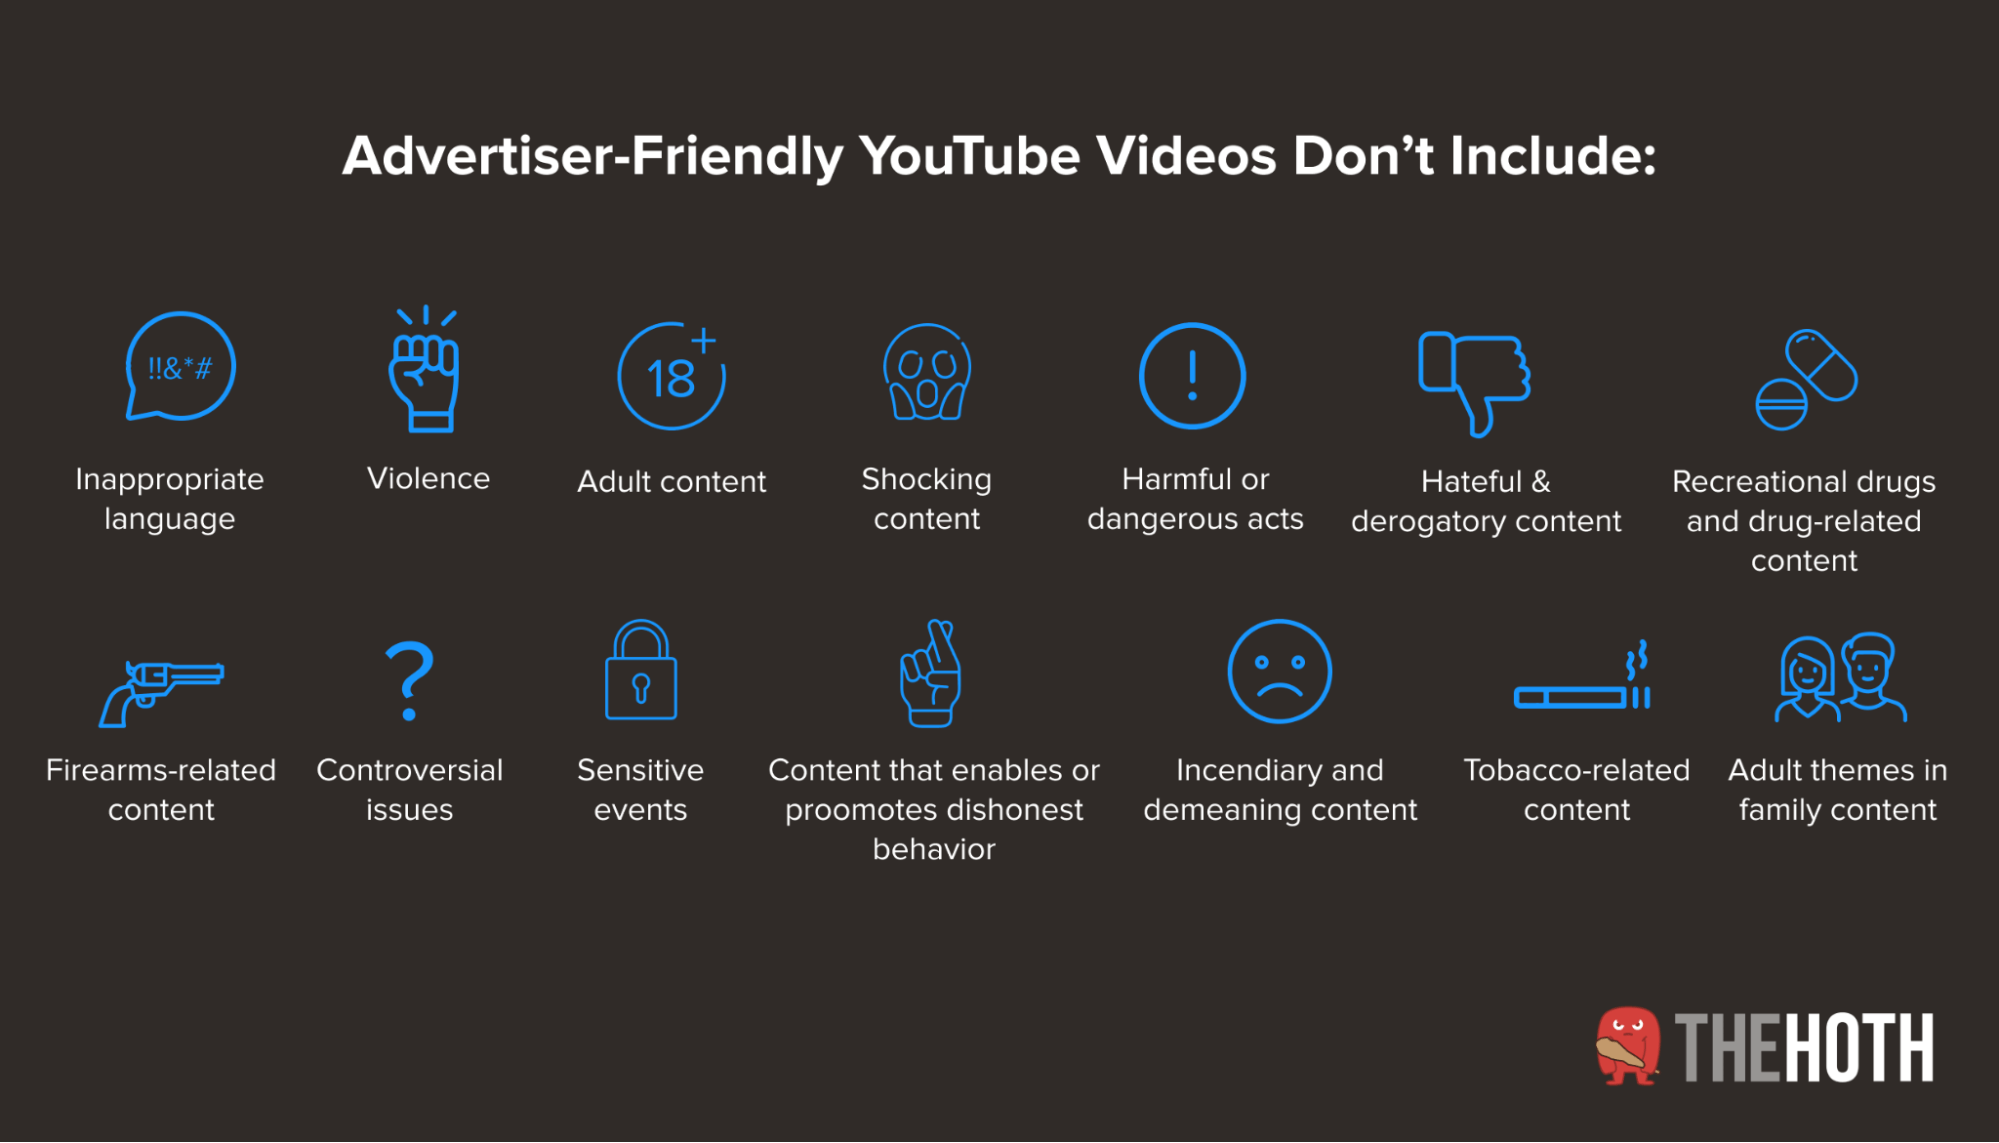 Table covering factors of advertiser-friendly videos